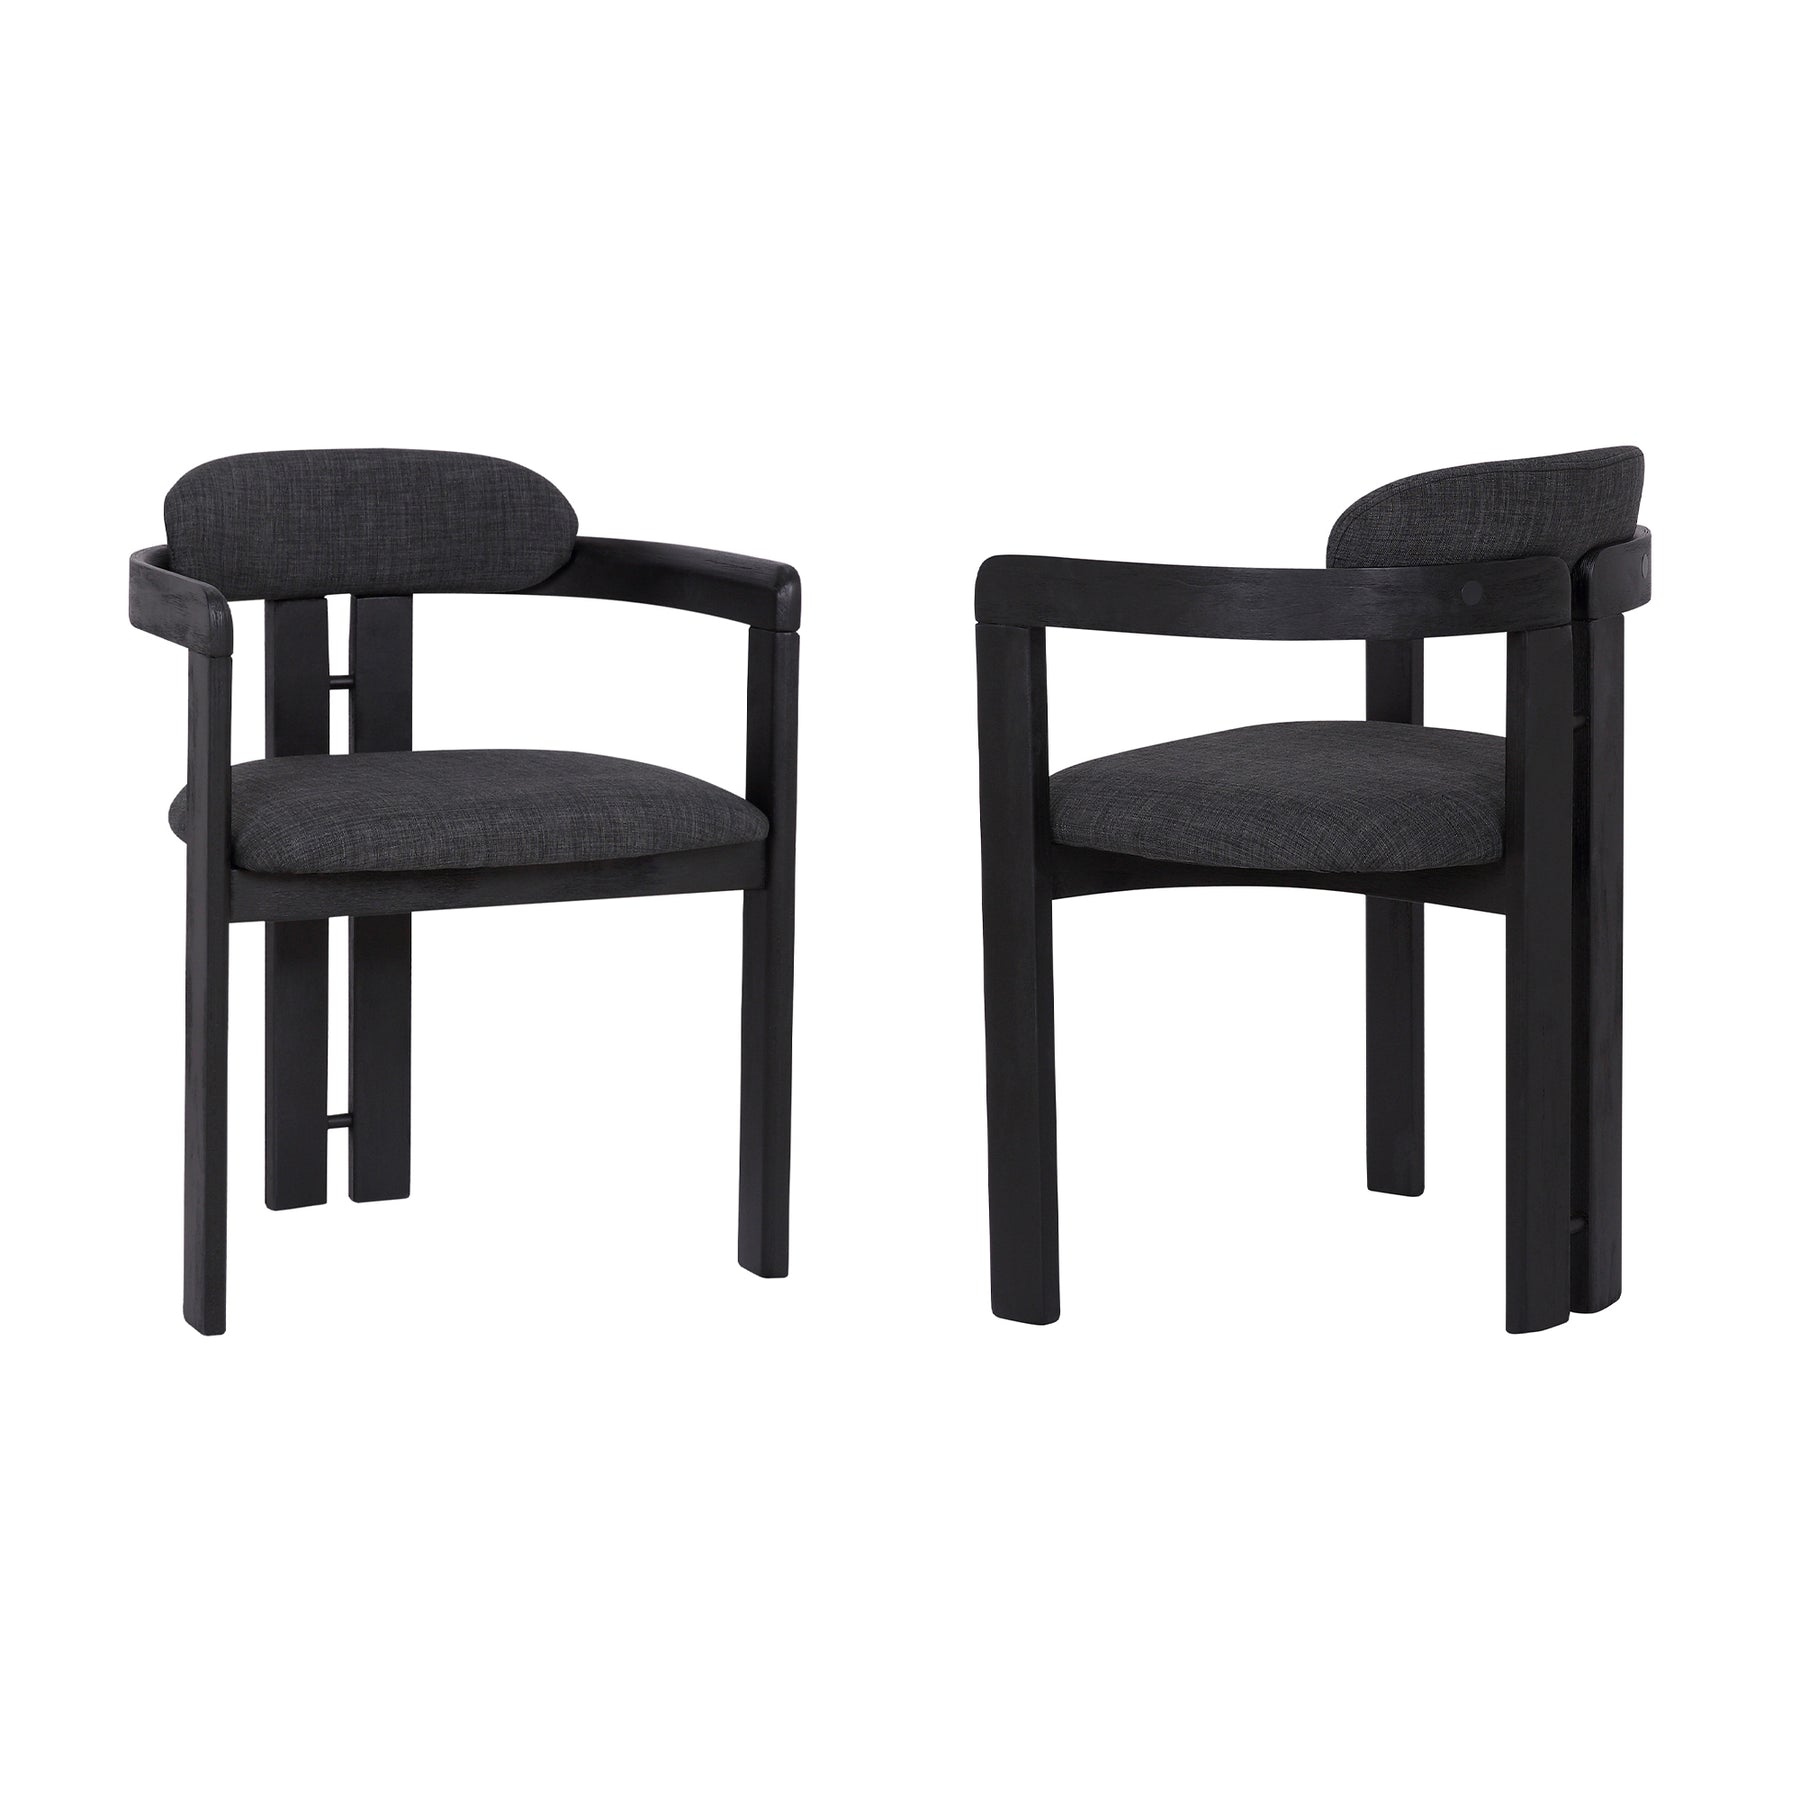 Armen Living Jazmin Modern Upholstered Fabric Dining Chairs, Set of 2, Charcoal/Black